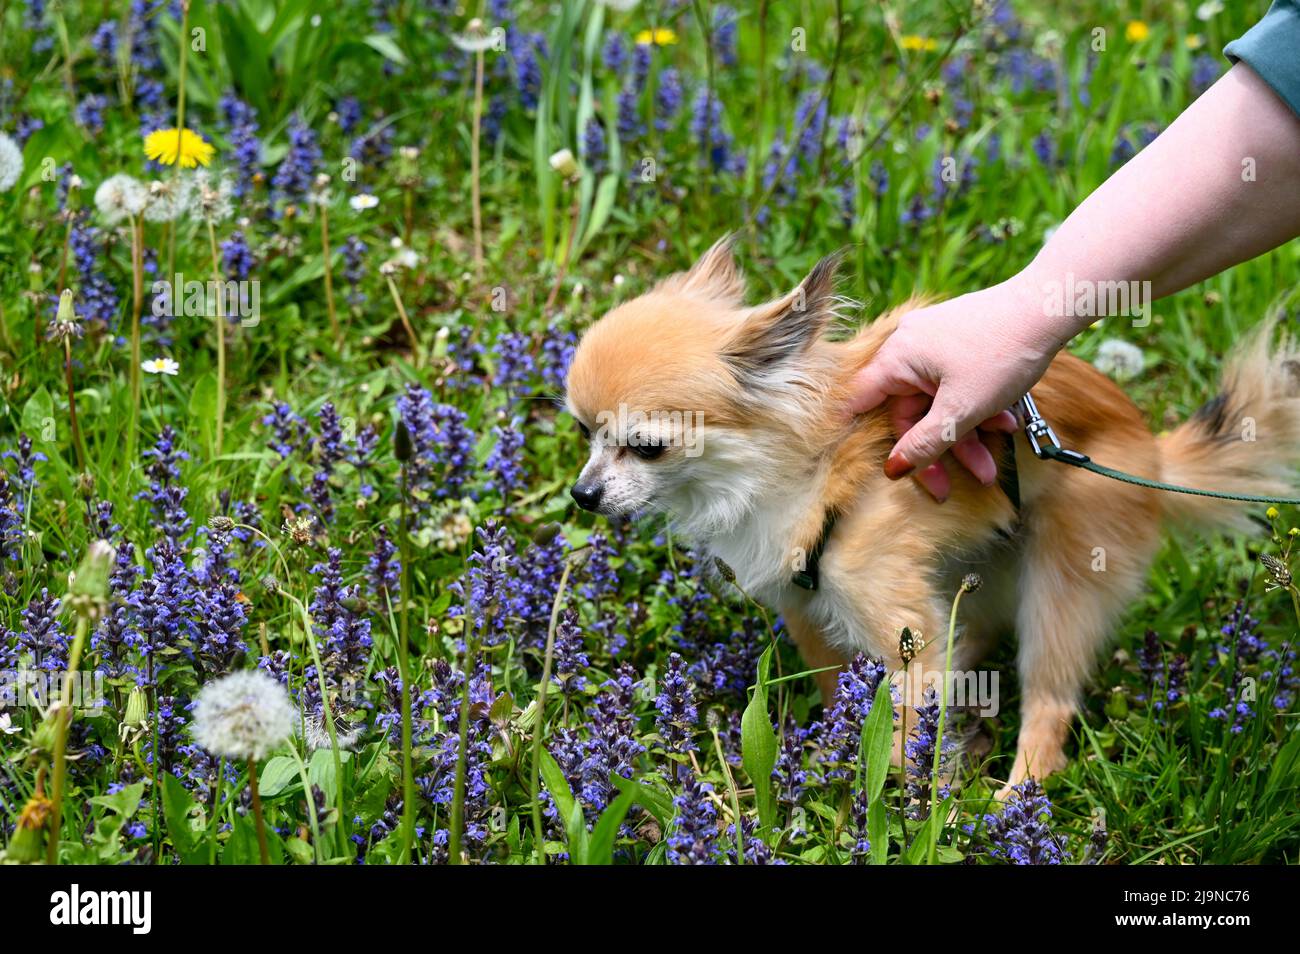 Chihuahua dog leashed while walking in a green meadow with purple flowers, woman's hand scratching the fur Stock Photo